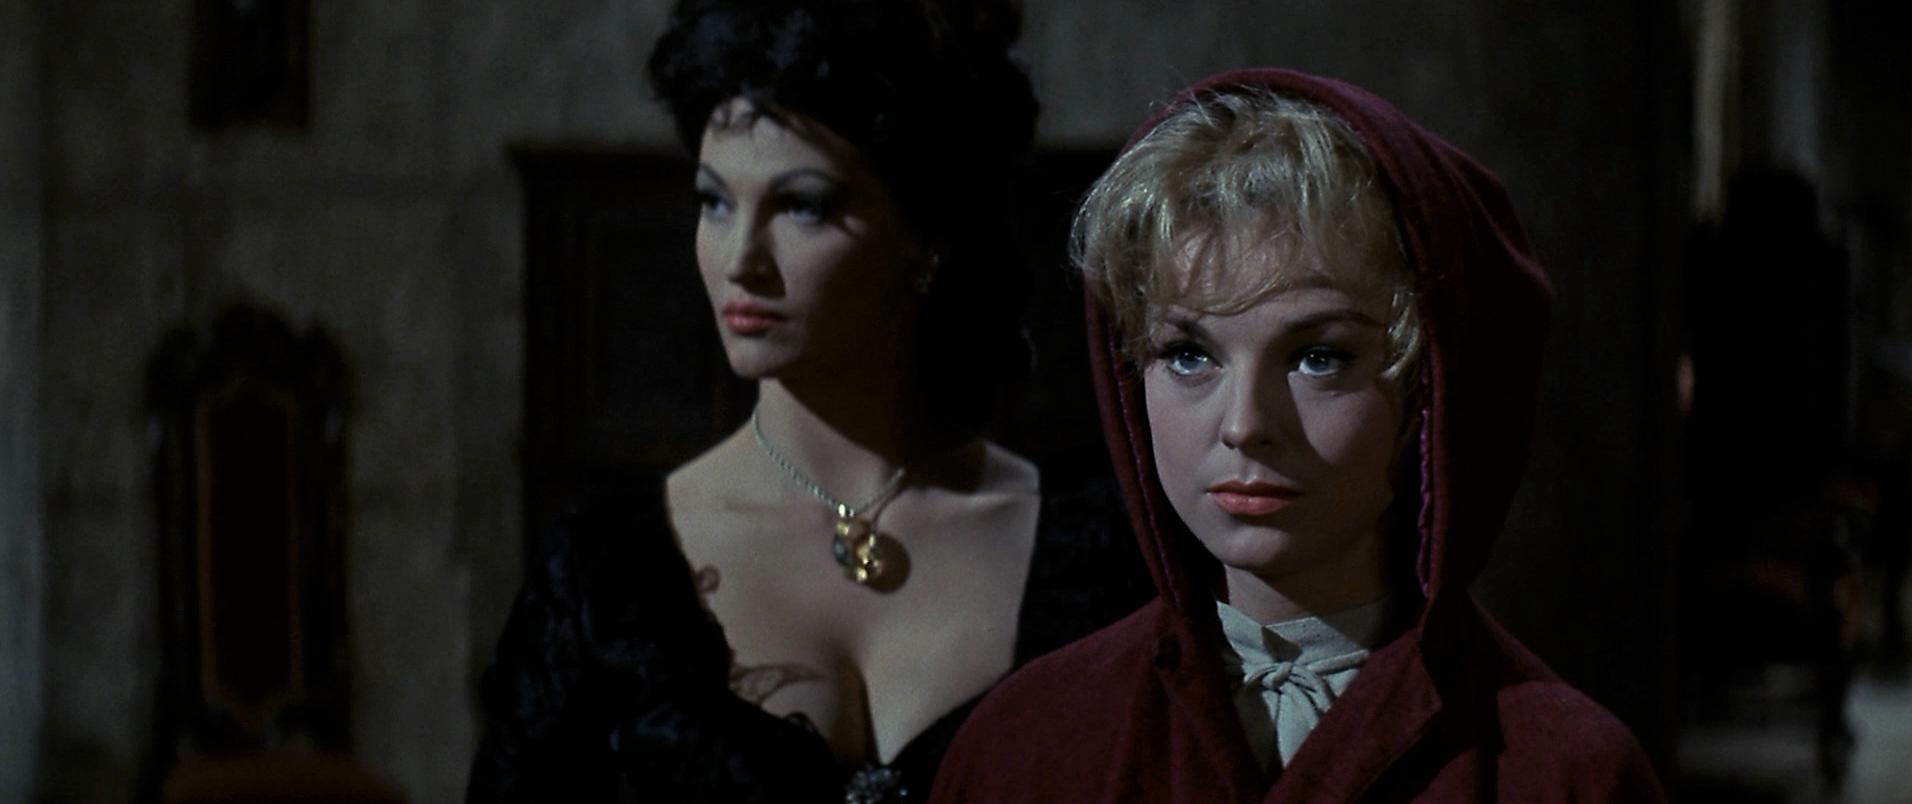 Darlene Lucht and Cathie Merchant in The Haunted Palace (1963)